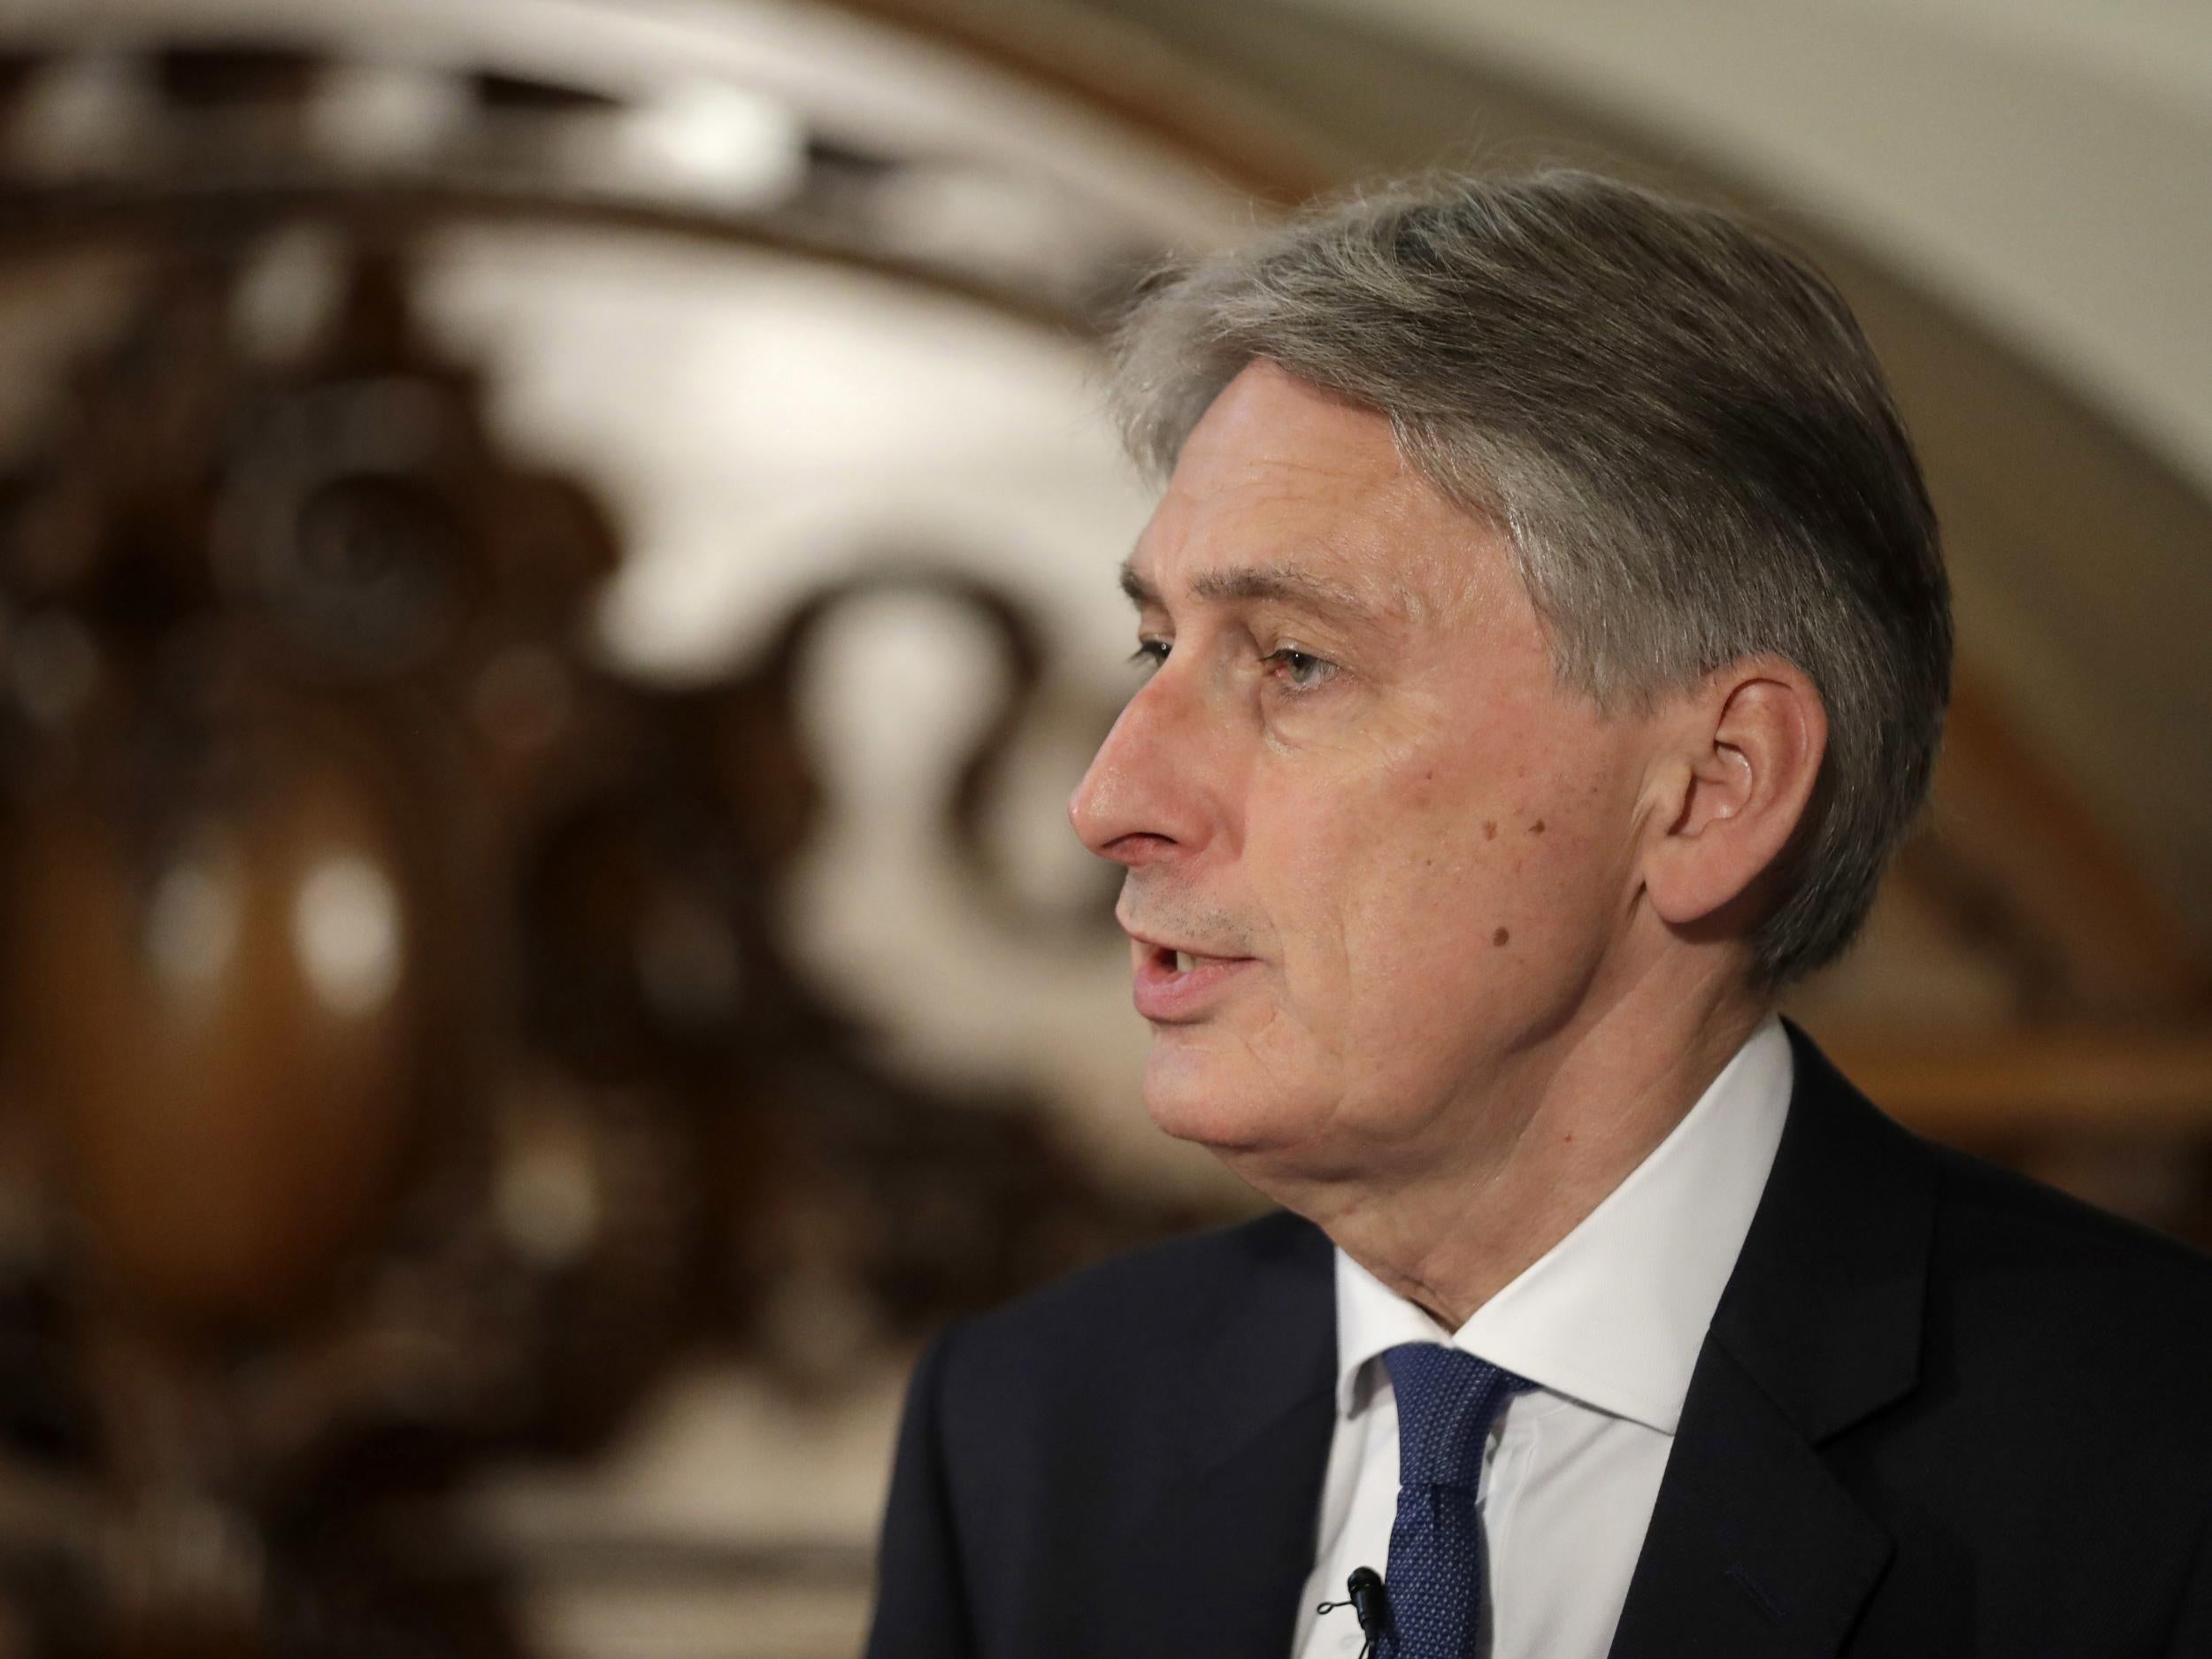 Philip Hammond has told Jeremy Hunt that the NHS needs to increase its productivity